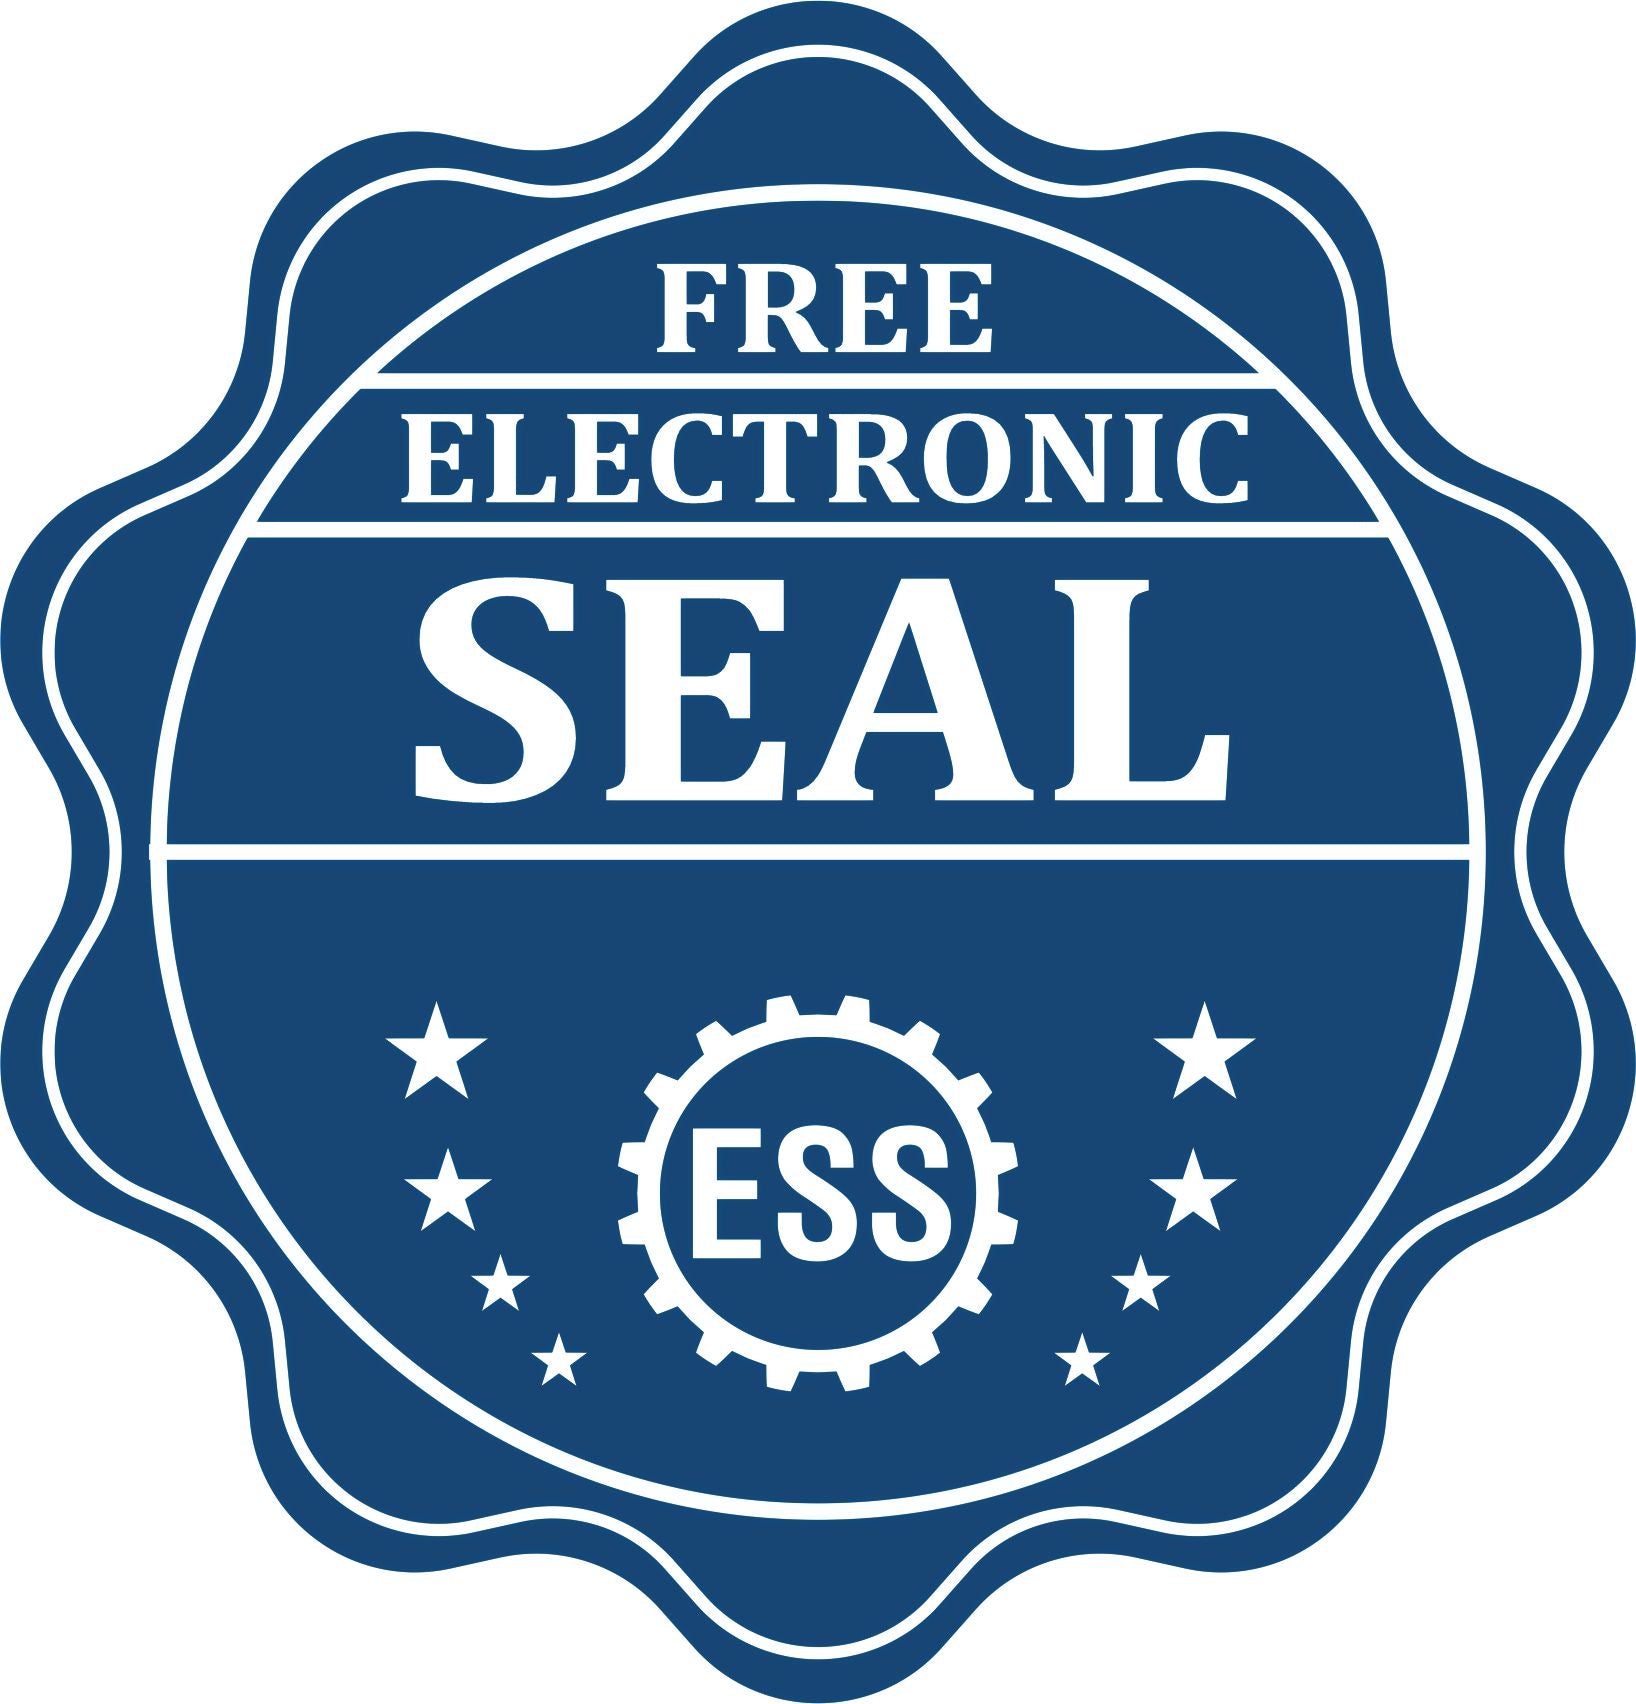 A badge showing a free electronic seal for the MaxLight Premium Pre-Inked Wyoming Rectangular Notarial Stamp with stars and the ESS gear on the emblem.